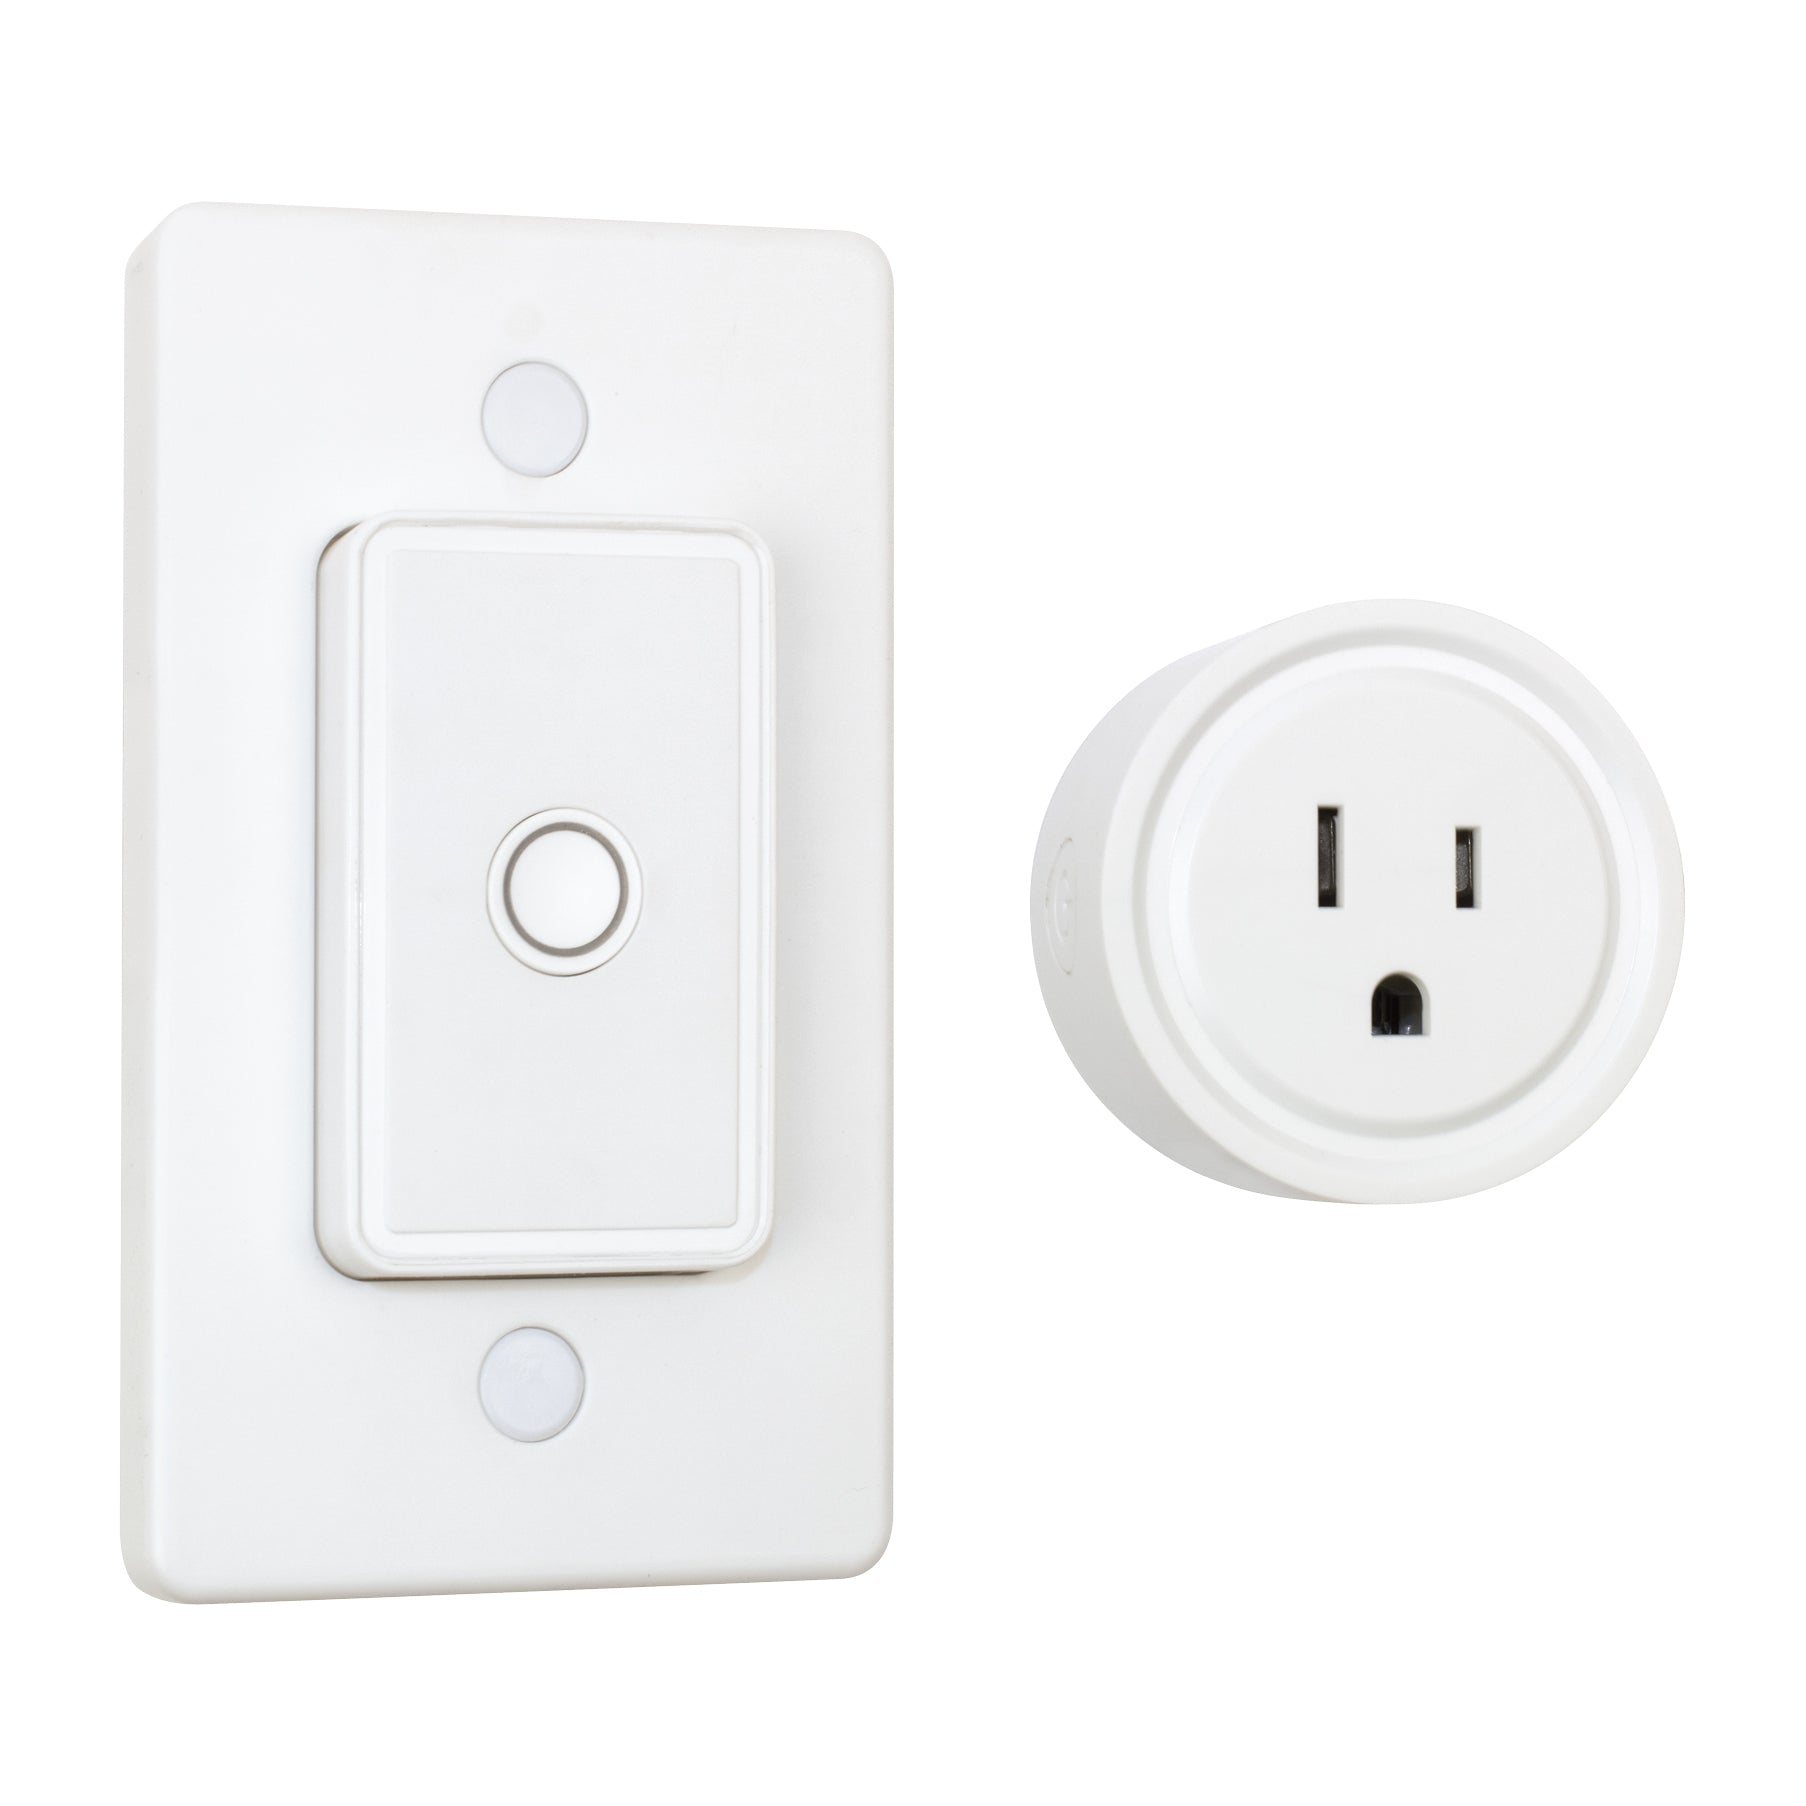 Hyper Tough Indoor and Outdoor Wireless Remote Control Outlet